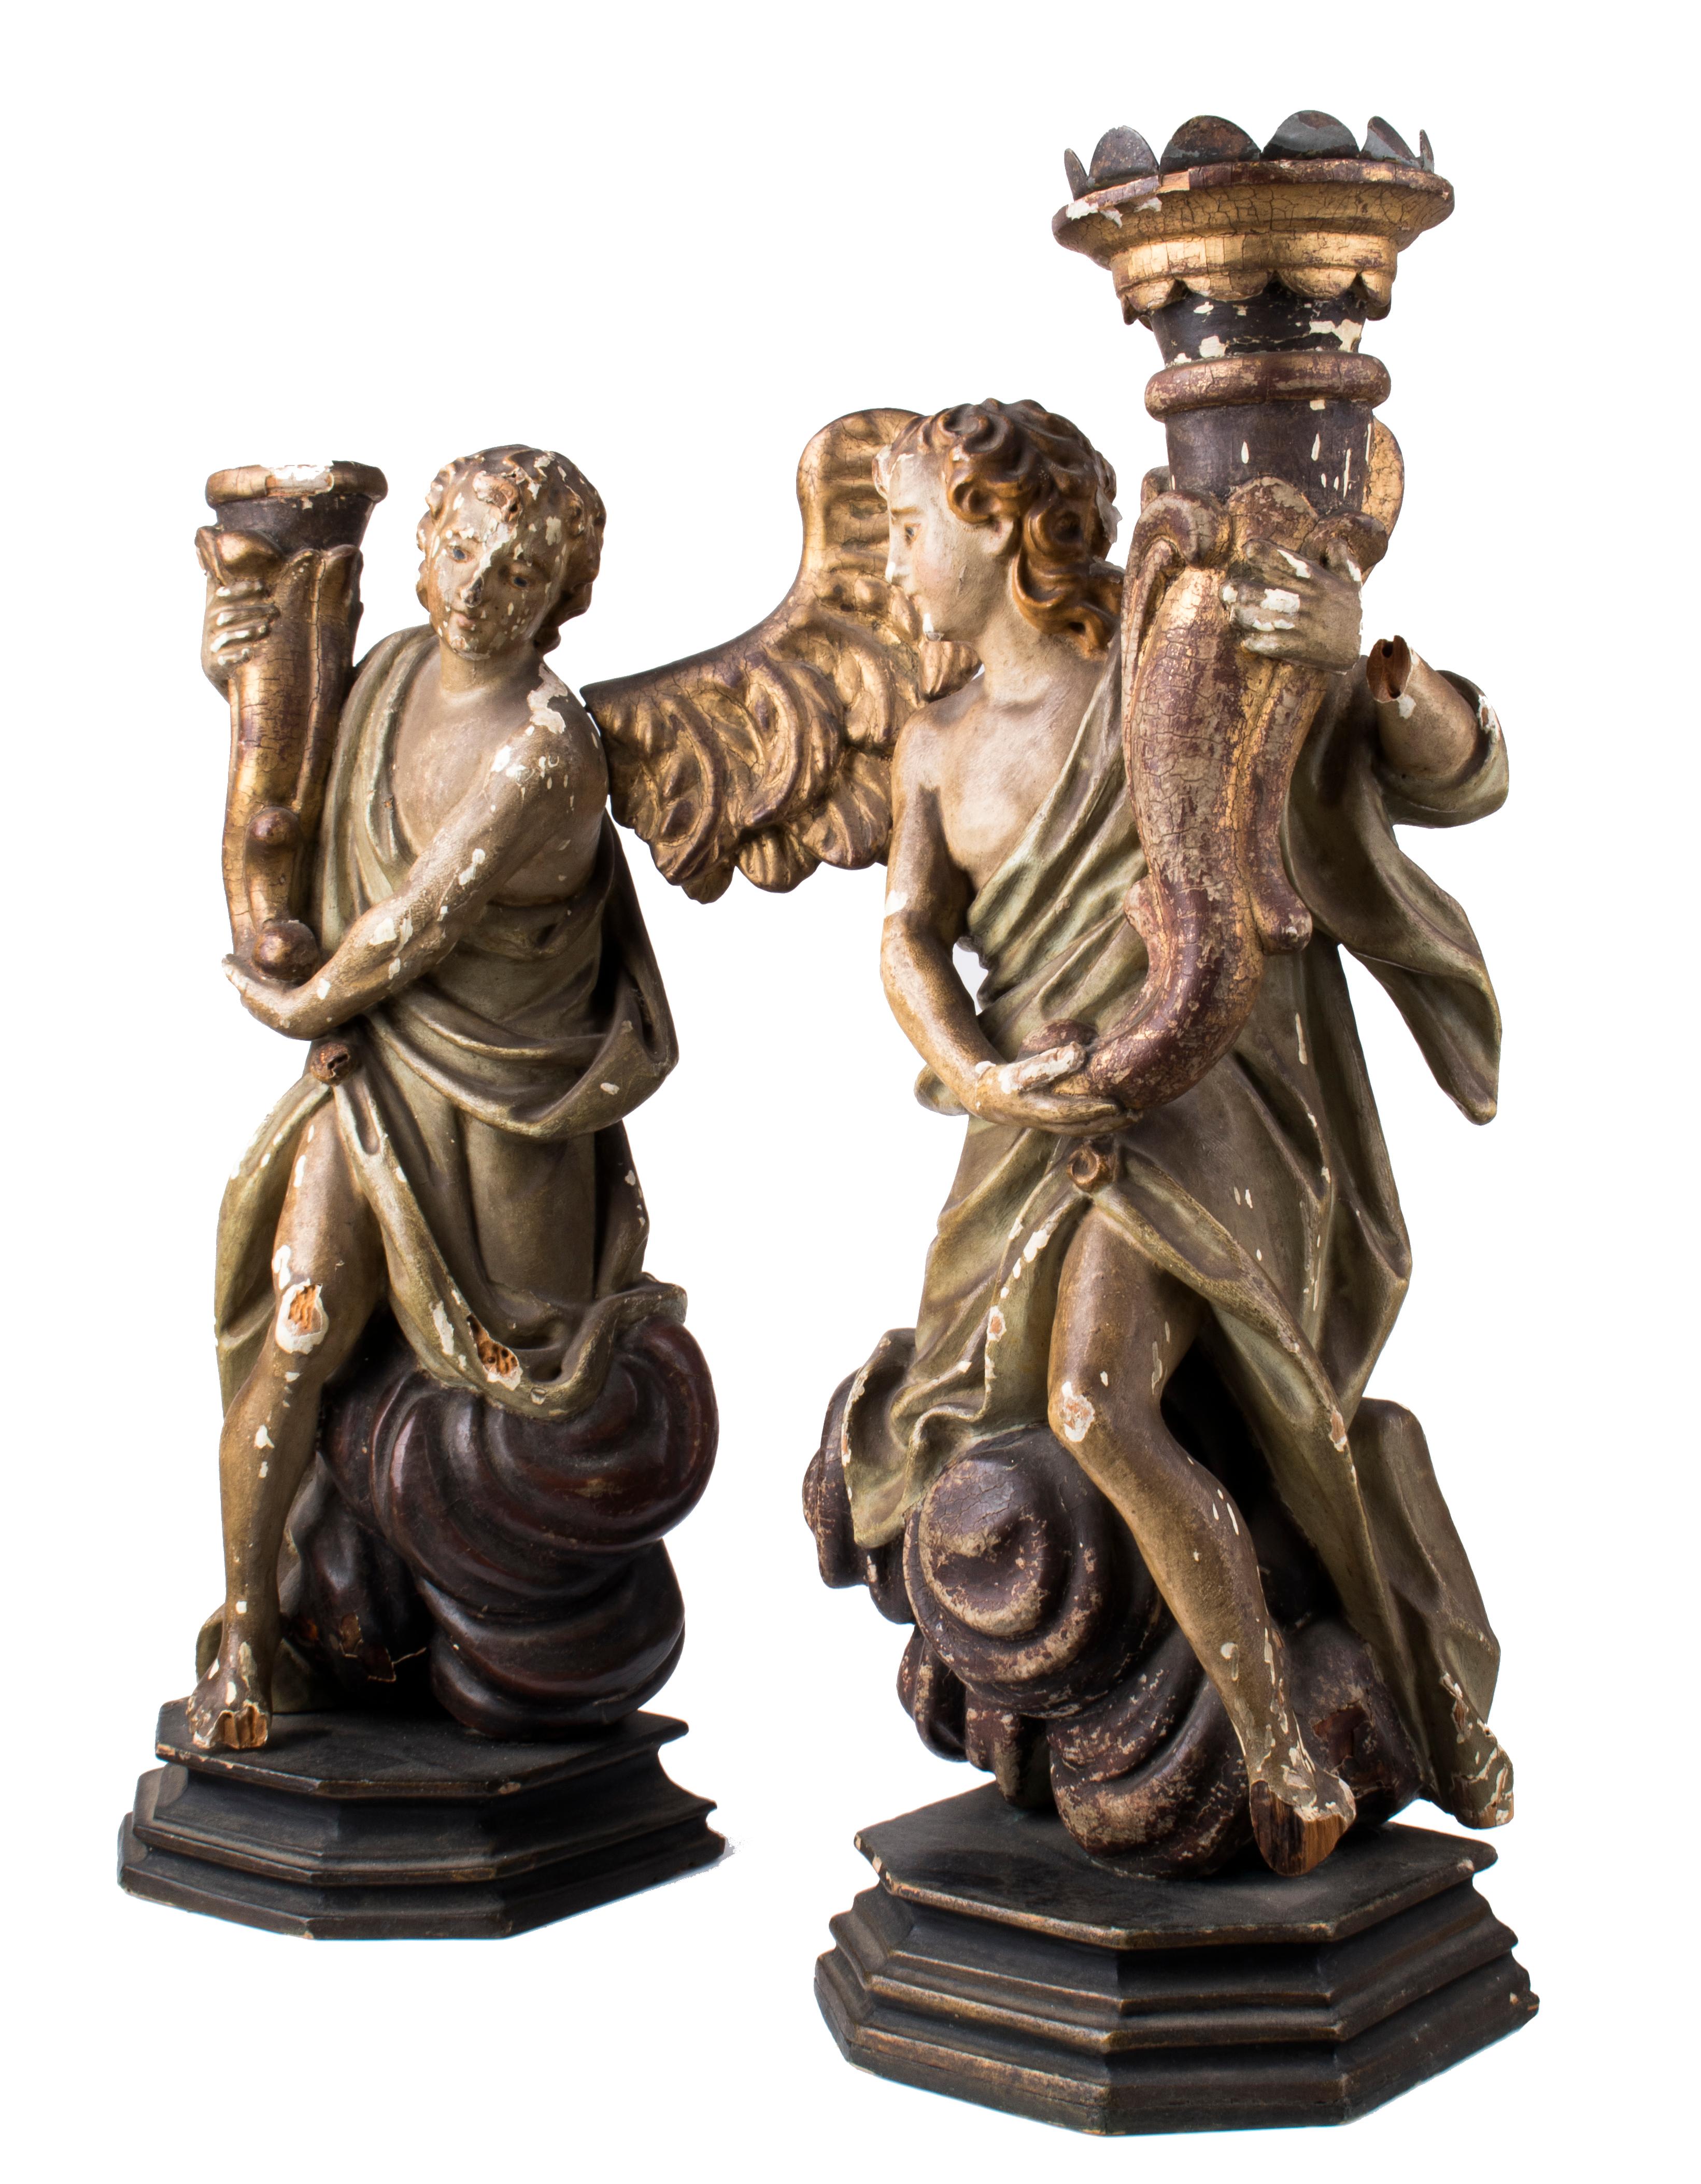 18th century pair of Spanish torch holder angel gold gilded wooden figures.

Total dimensions with base: 33 x 10.5 x 21
without base 30 x 9 x 21 cm.